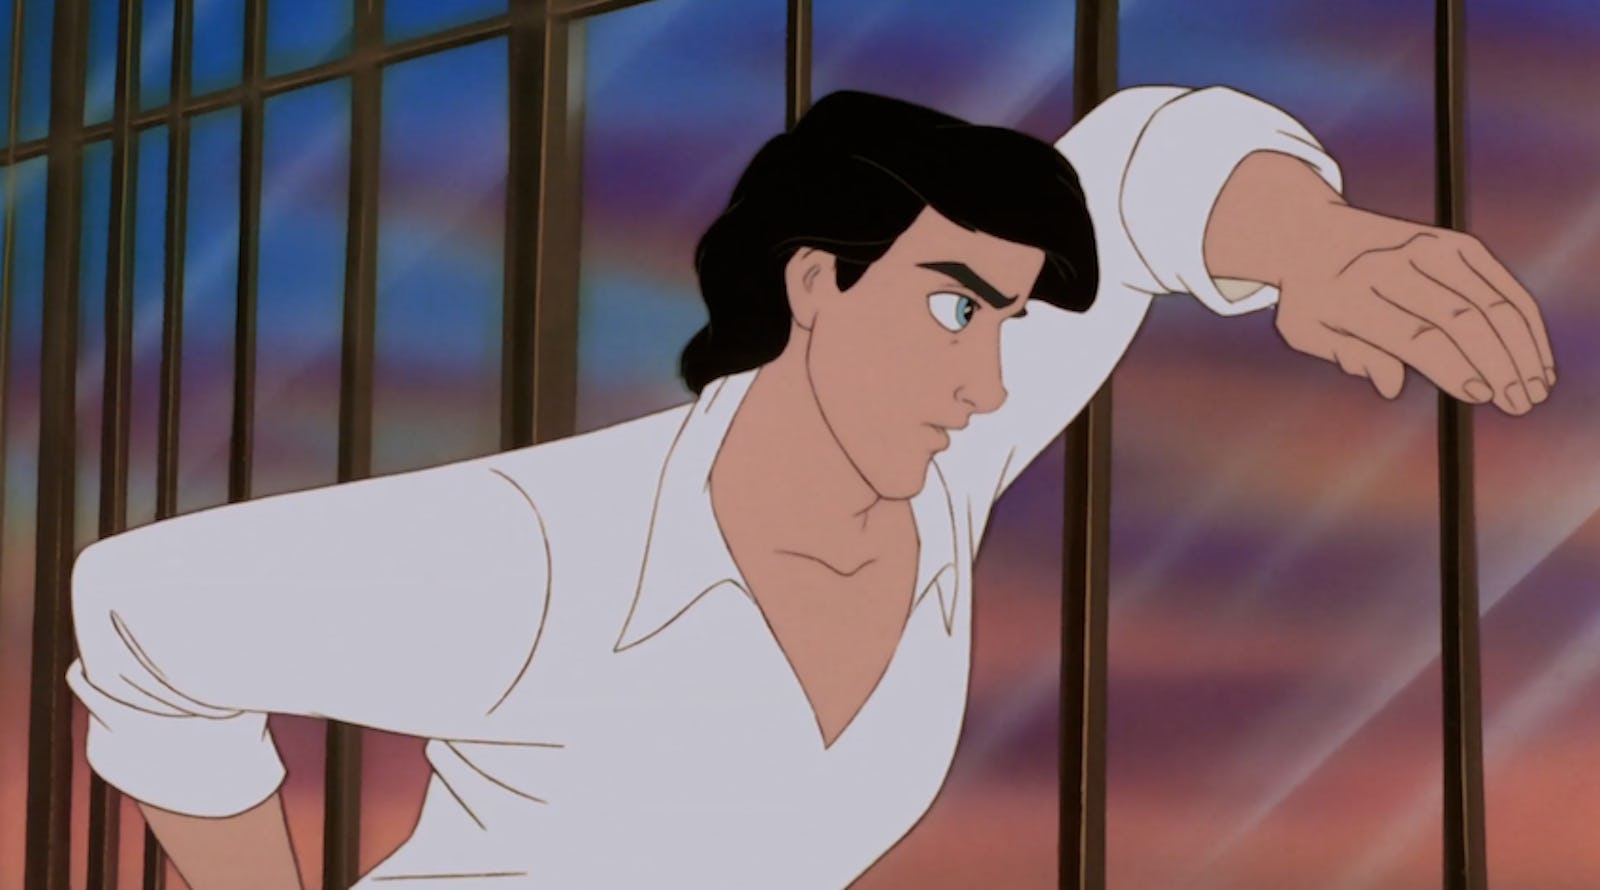 Prince Eric from The Little Mermaid - wide 1